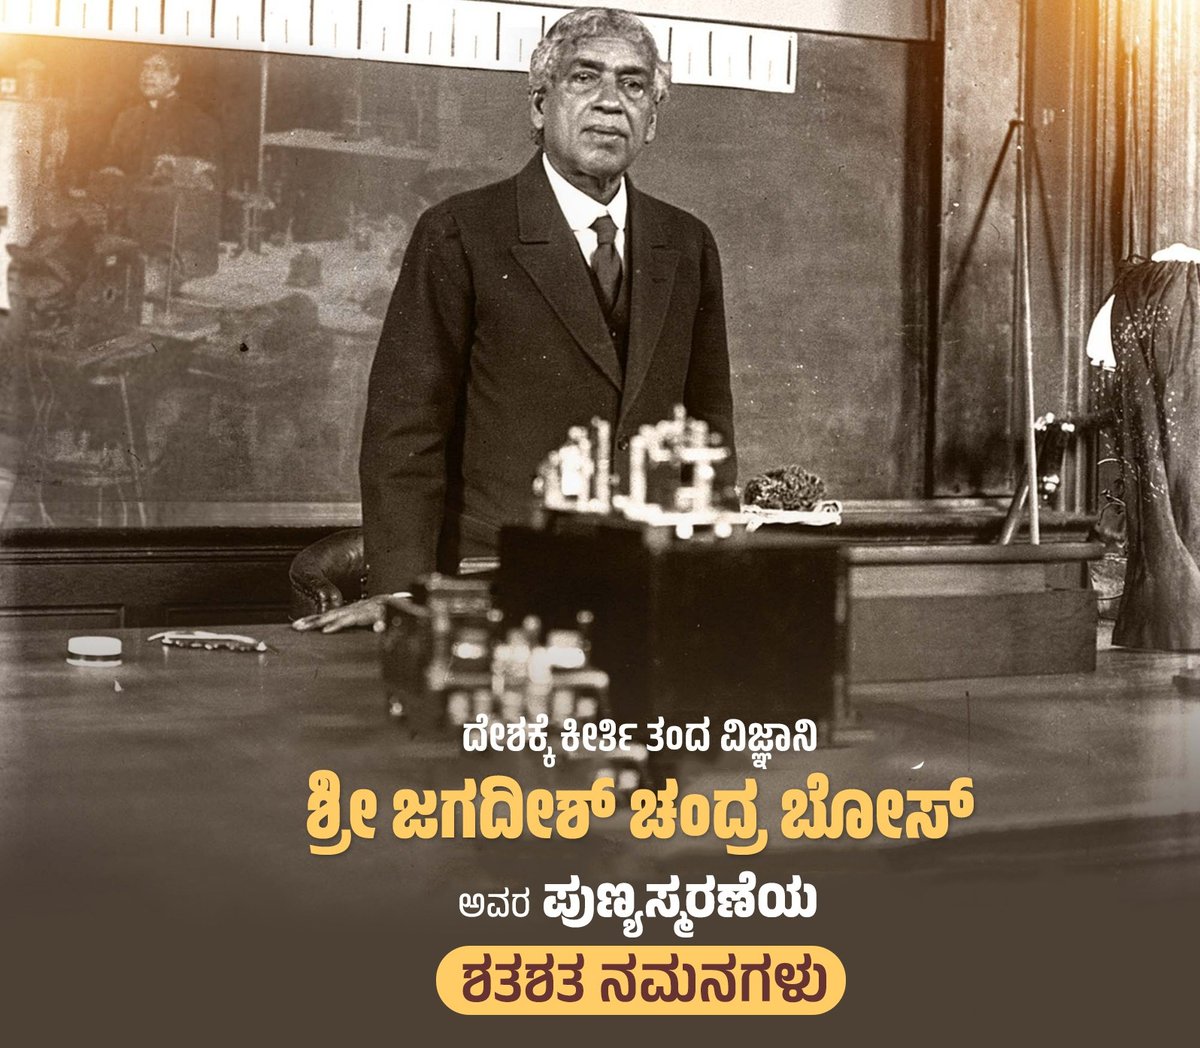 23rd Nov 1937 #TheDayInHistory

Sir #JagadishChandraBose,the most prominent scientists who proved that both animals & plants share much in common.He demonstrated that plants are also sensitive to heat,cold,light,noise & various other external stimuli

Tributes on his Smruti din.